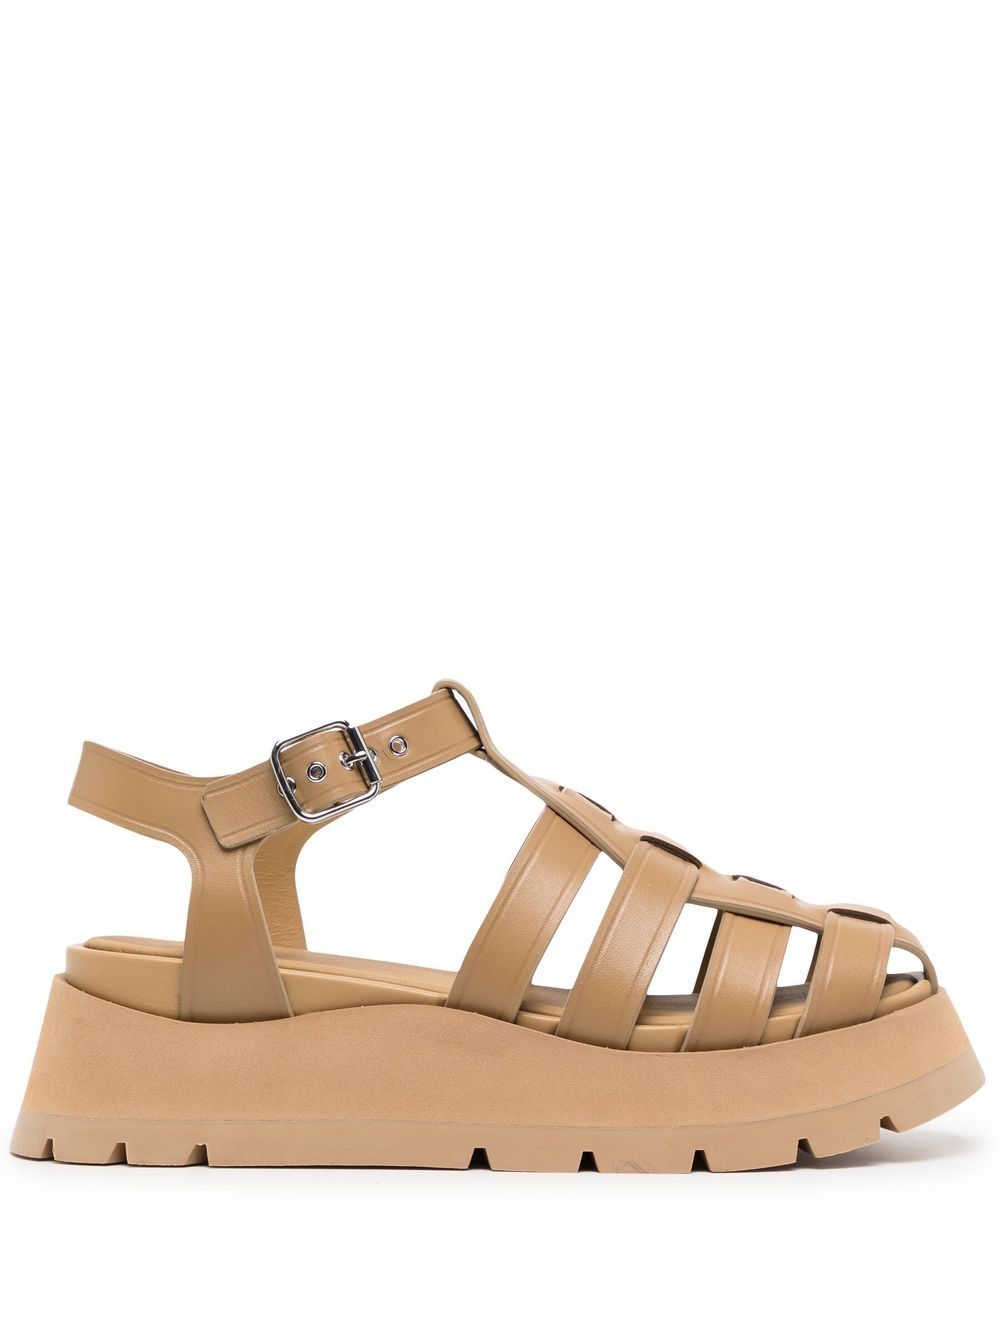 3.1 Phillip Lim / フィリップ リム Women's Kate Fisherman Leather Lug-sole Sandals In Beige